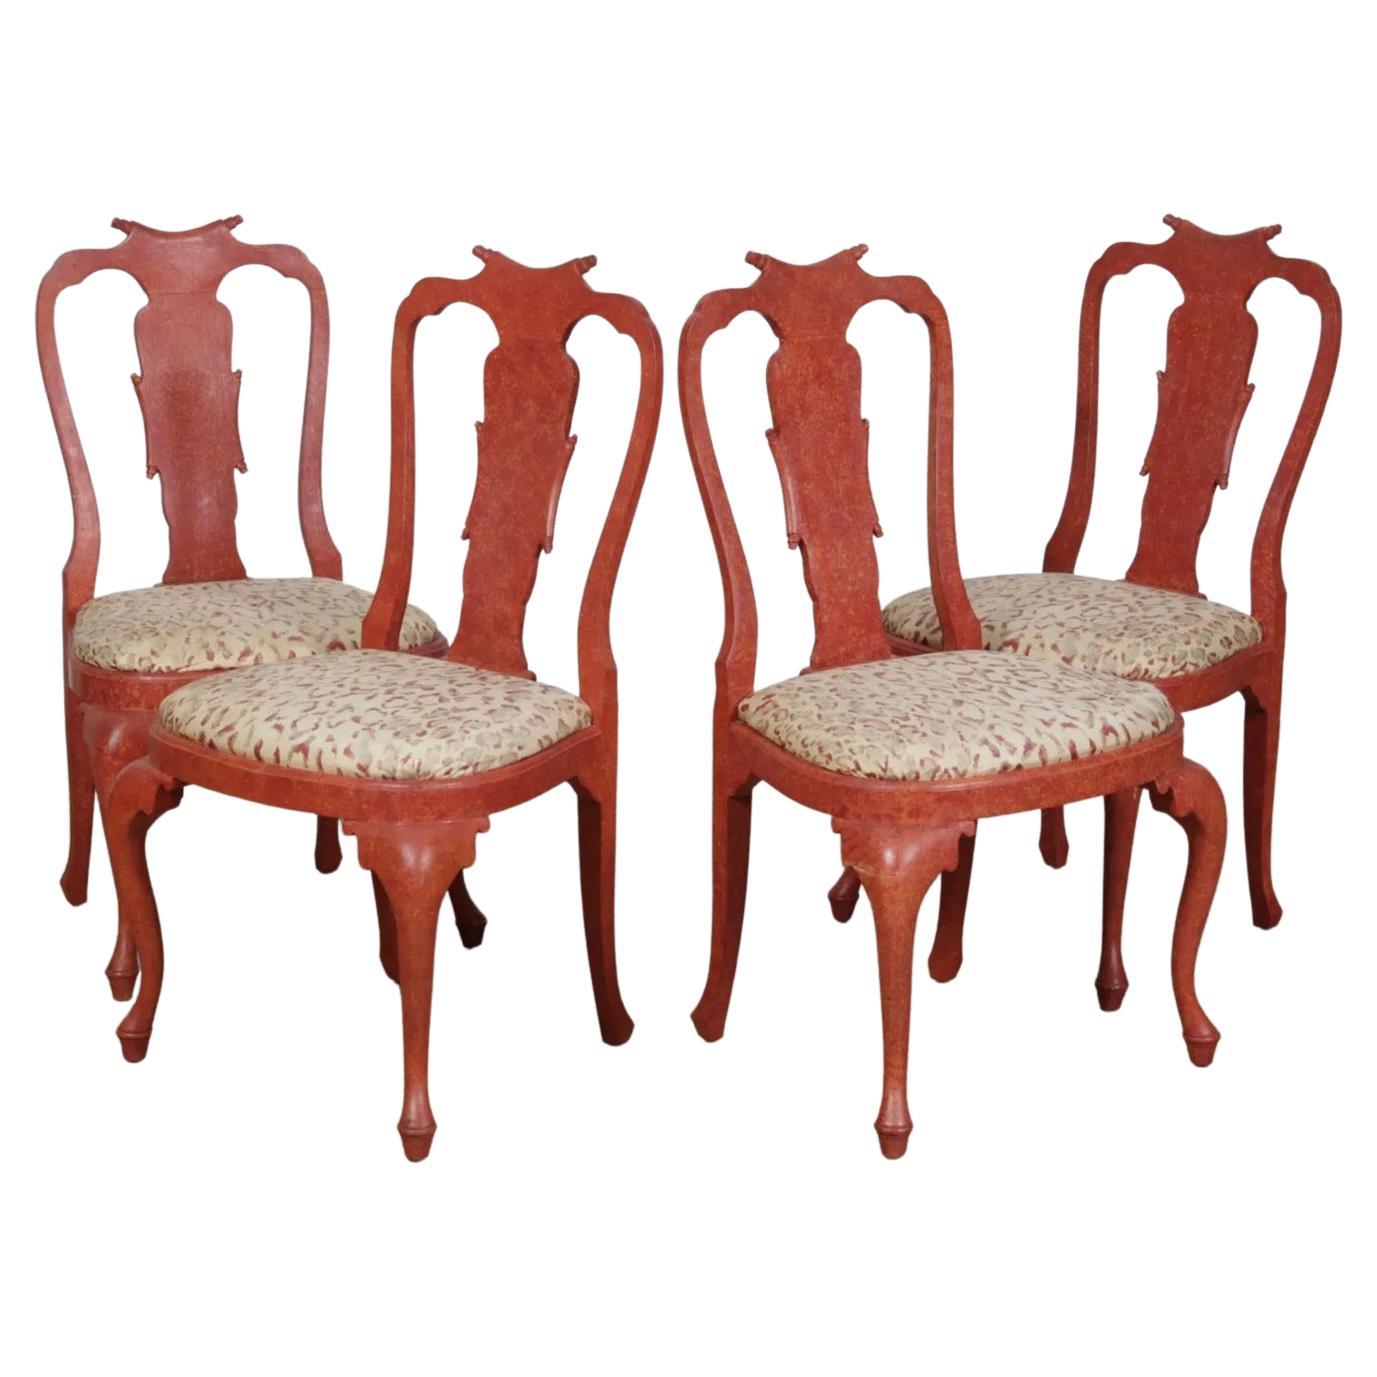 4 Italian Rococo Style Red Painted Dining Side Chairs